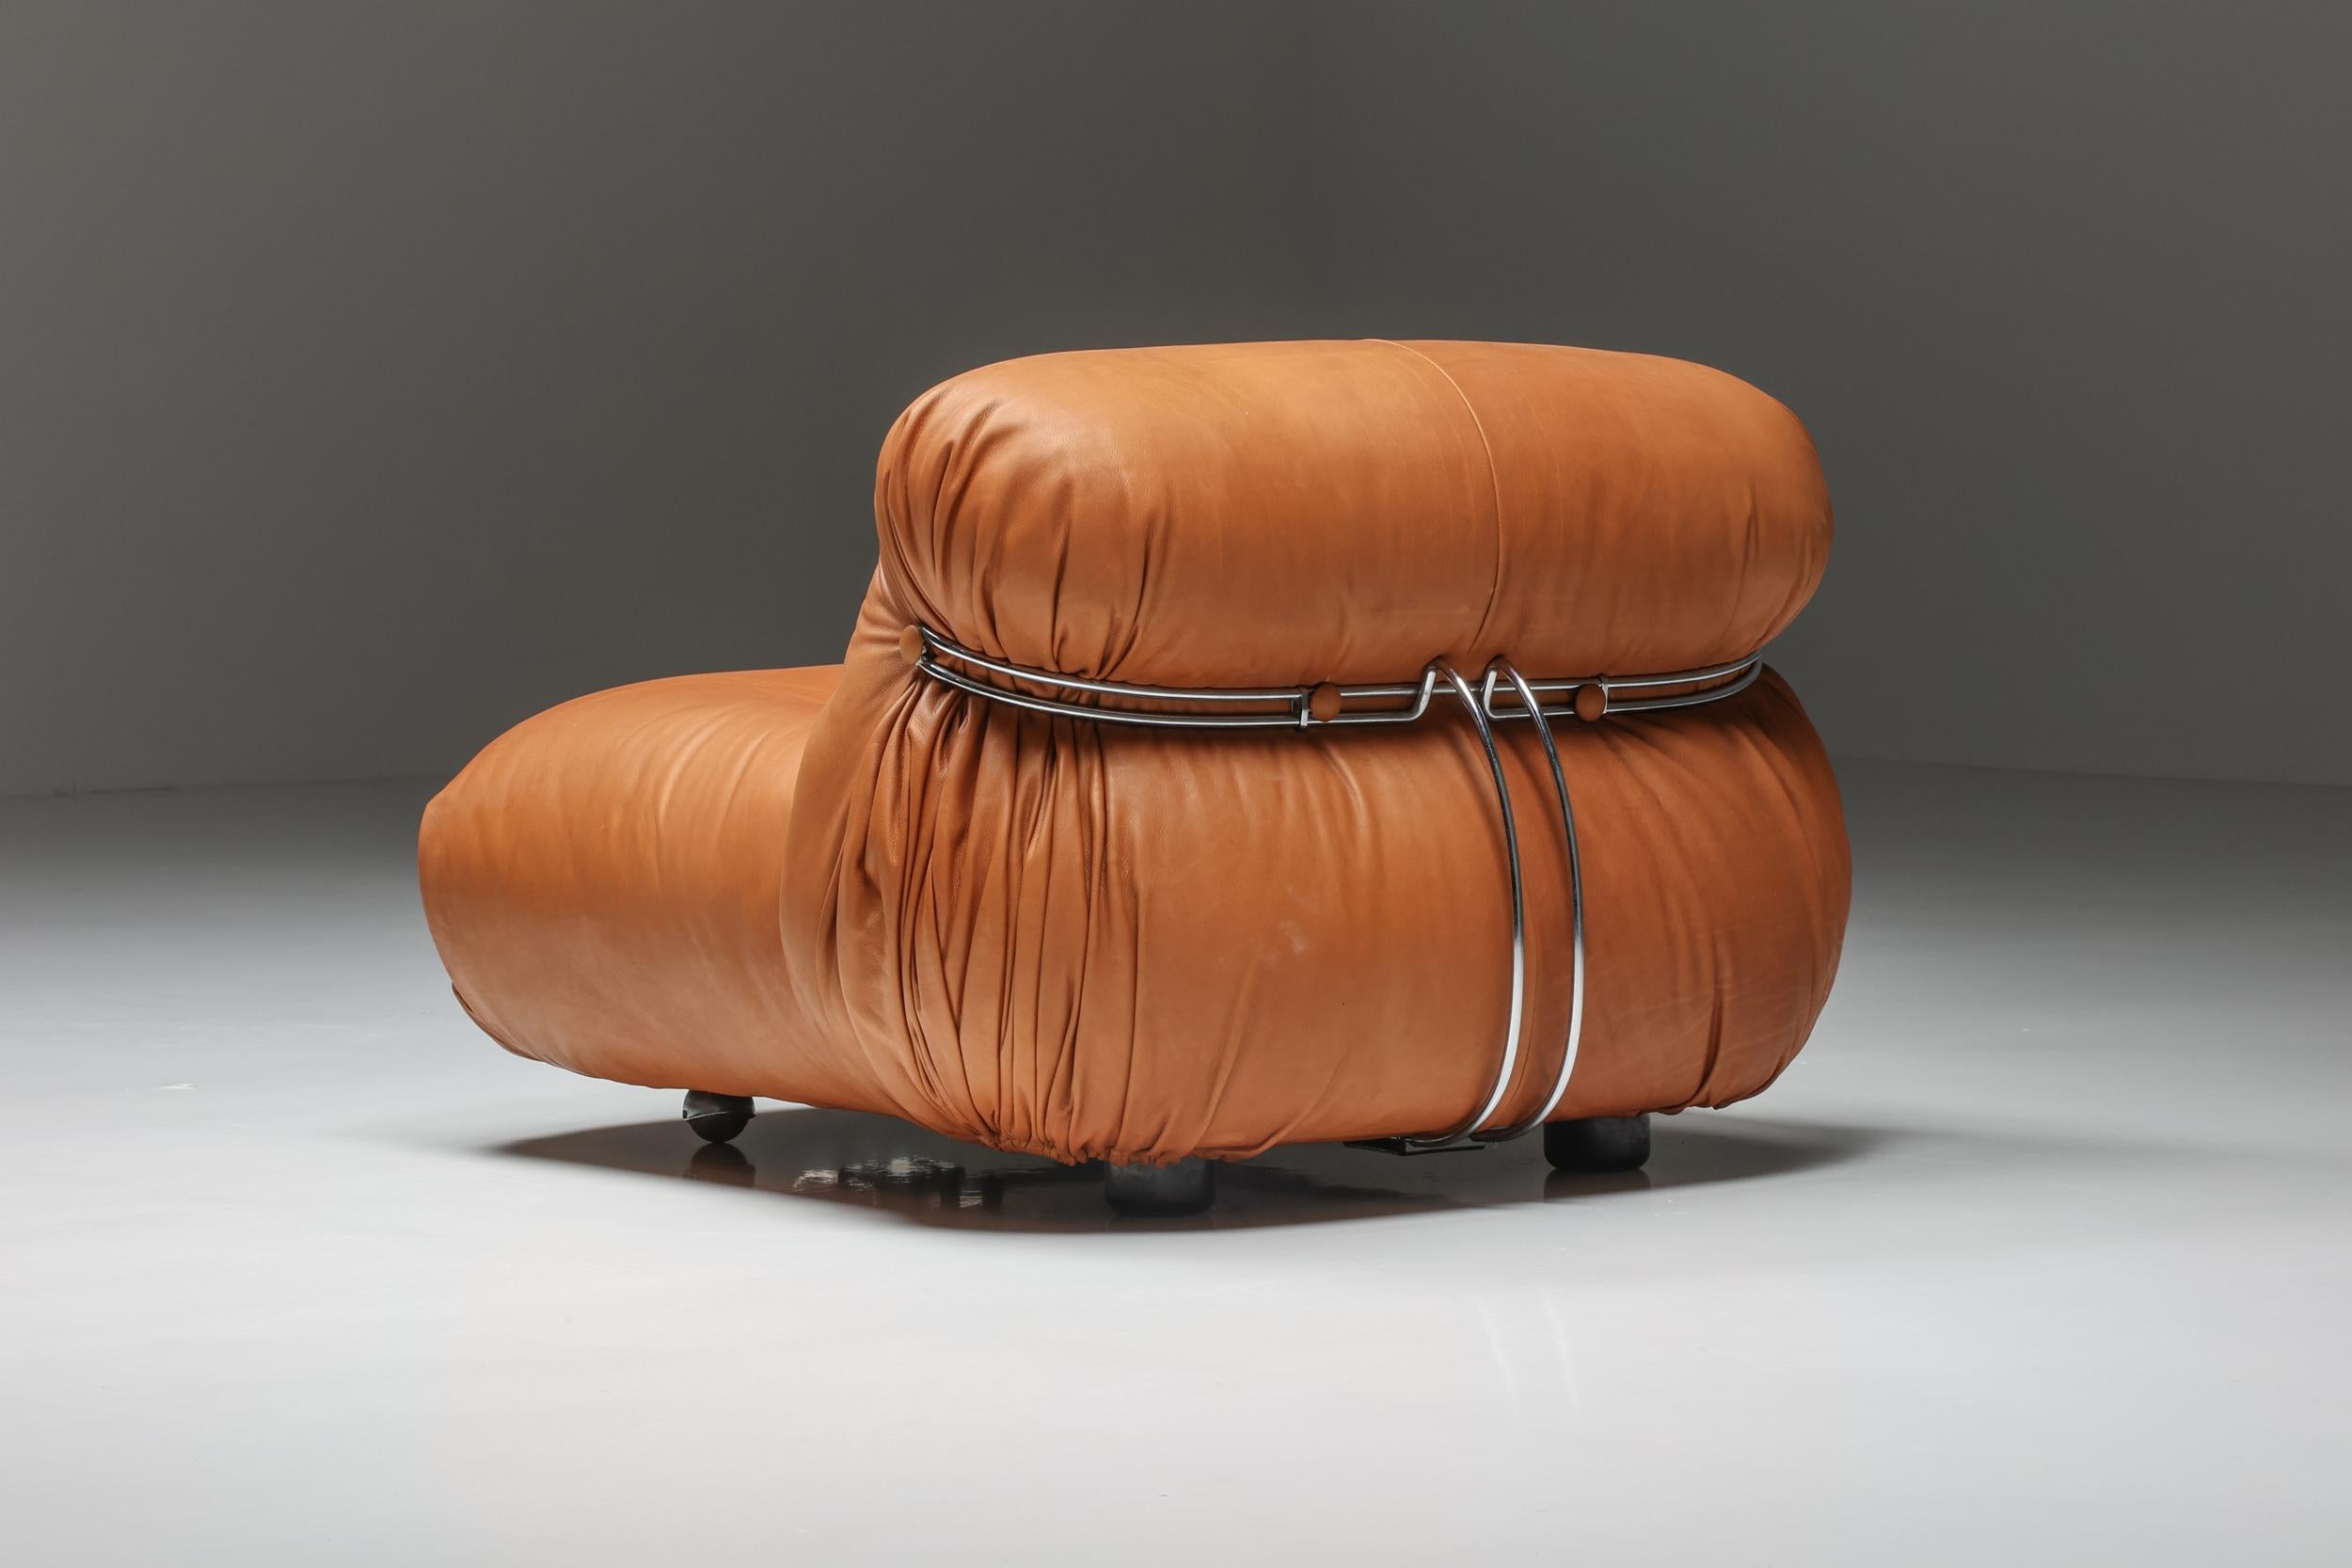 Leather Afra and Tobia Scarpa for Cassina 'Soriana' Pair of Lounge Chairs, 1970's